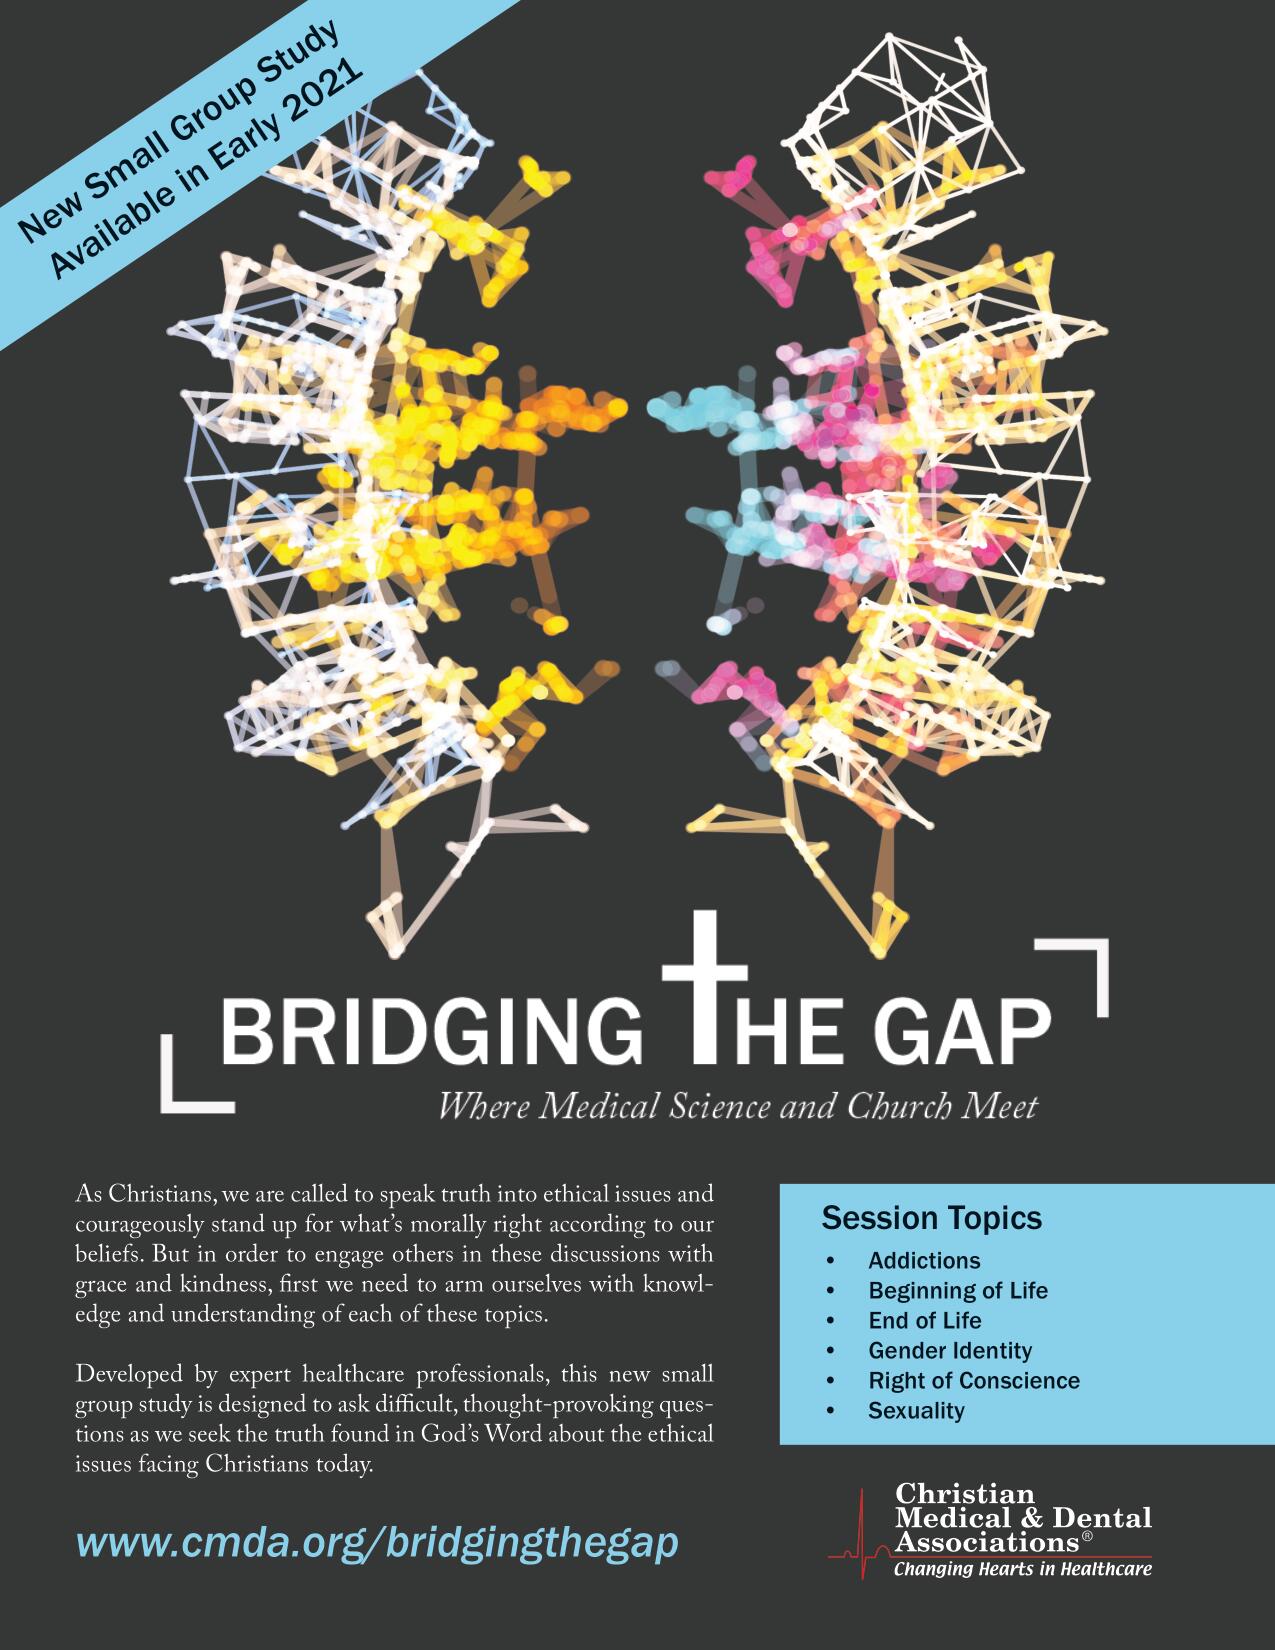 Bridging the Gap - Where Medical Science and the Church Meet